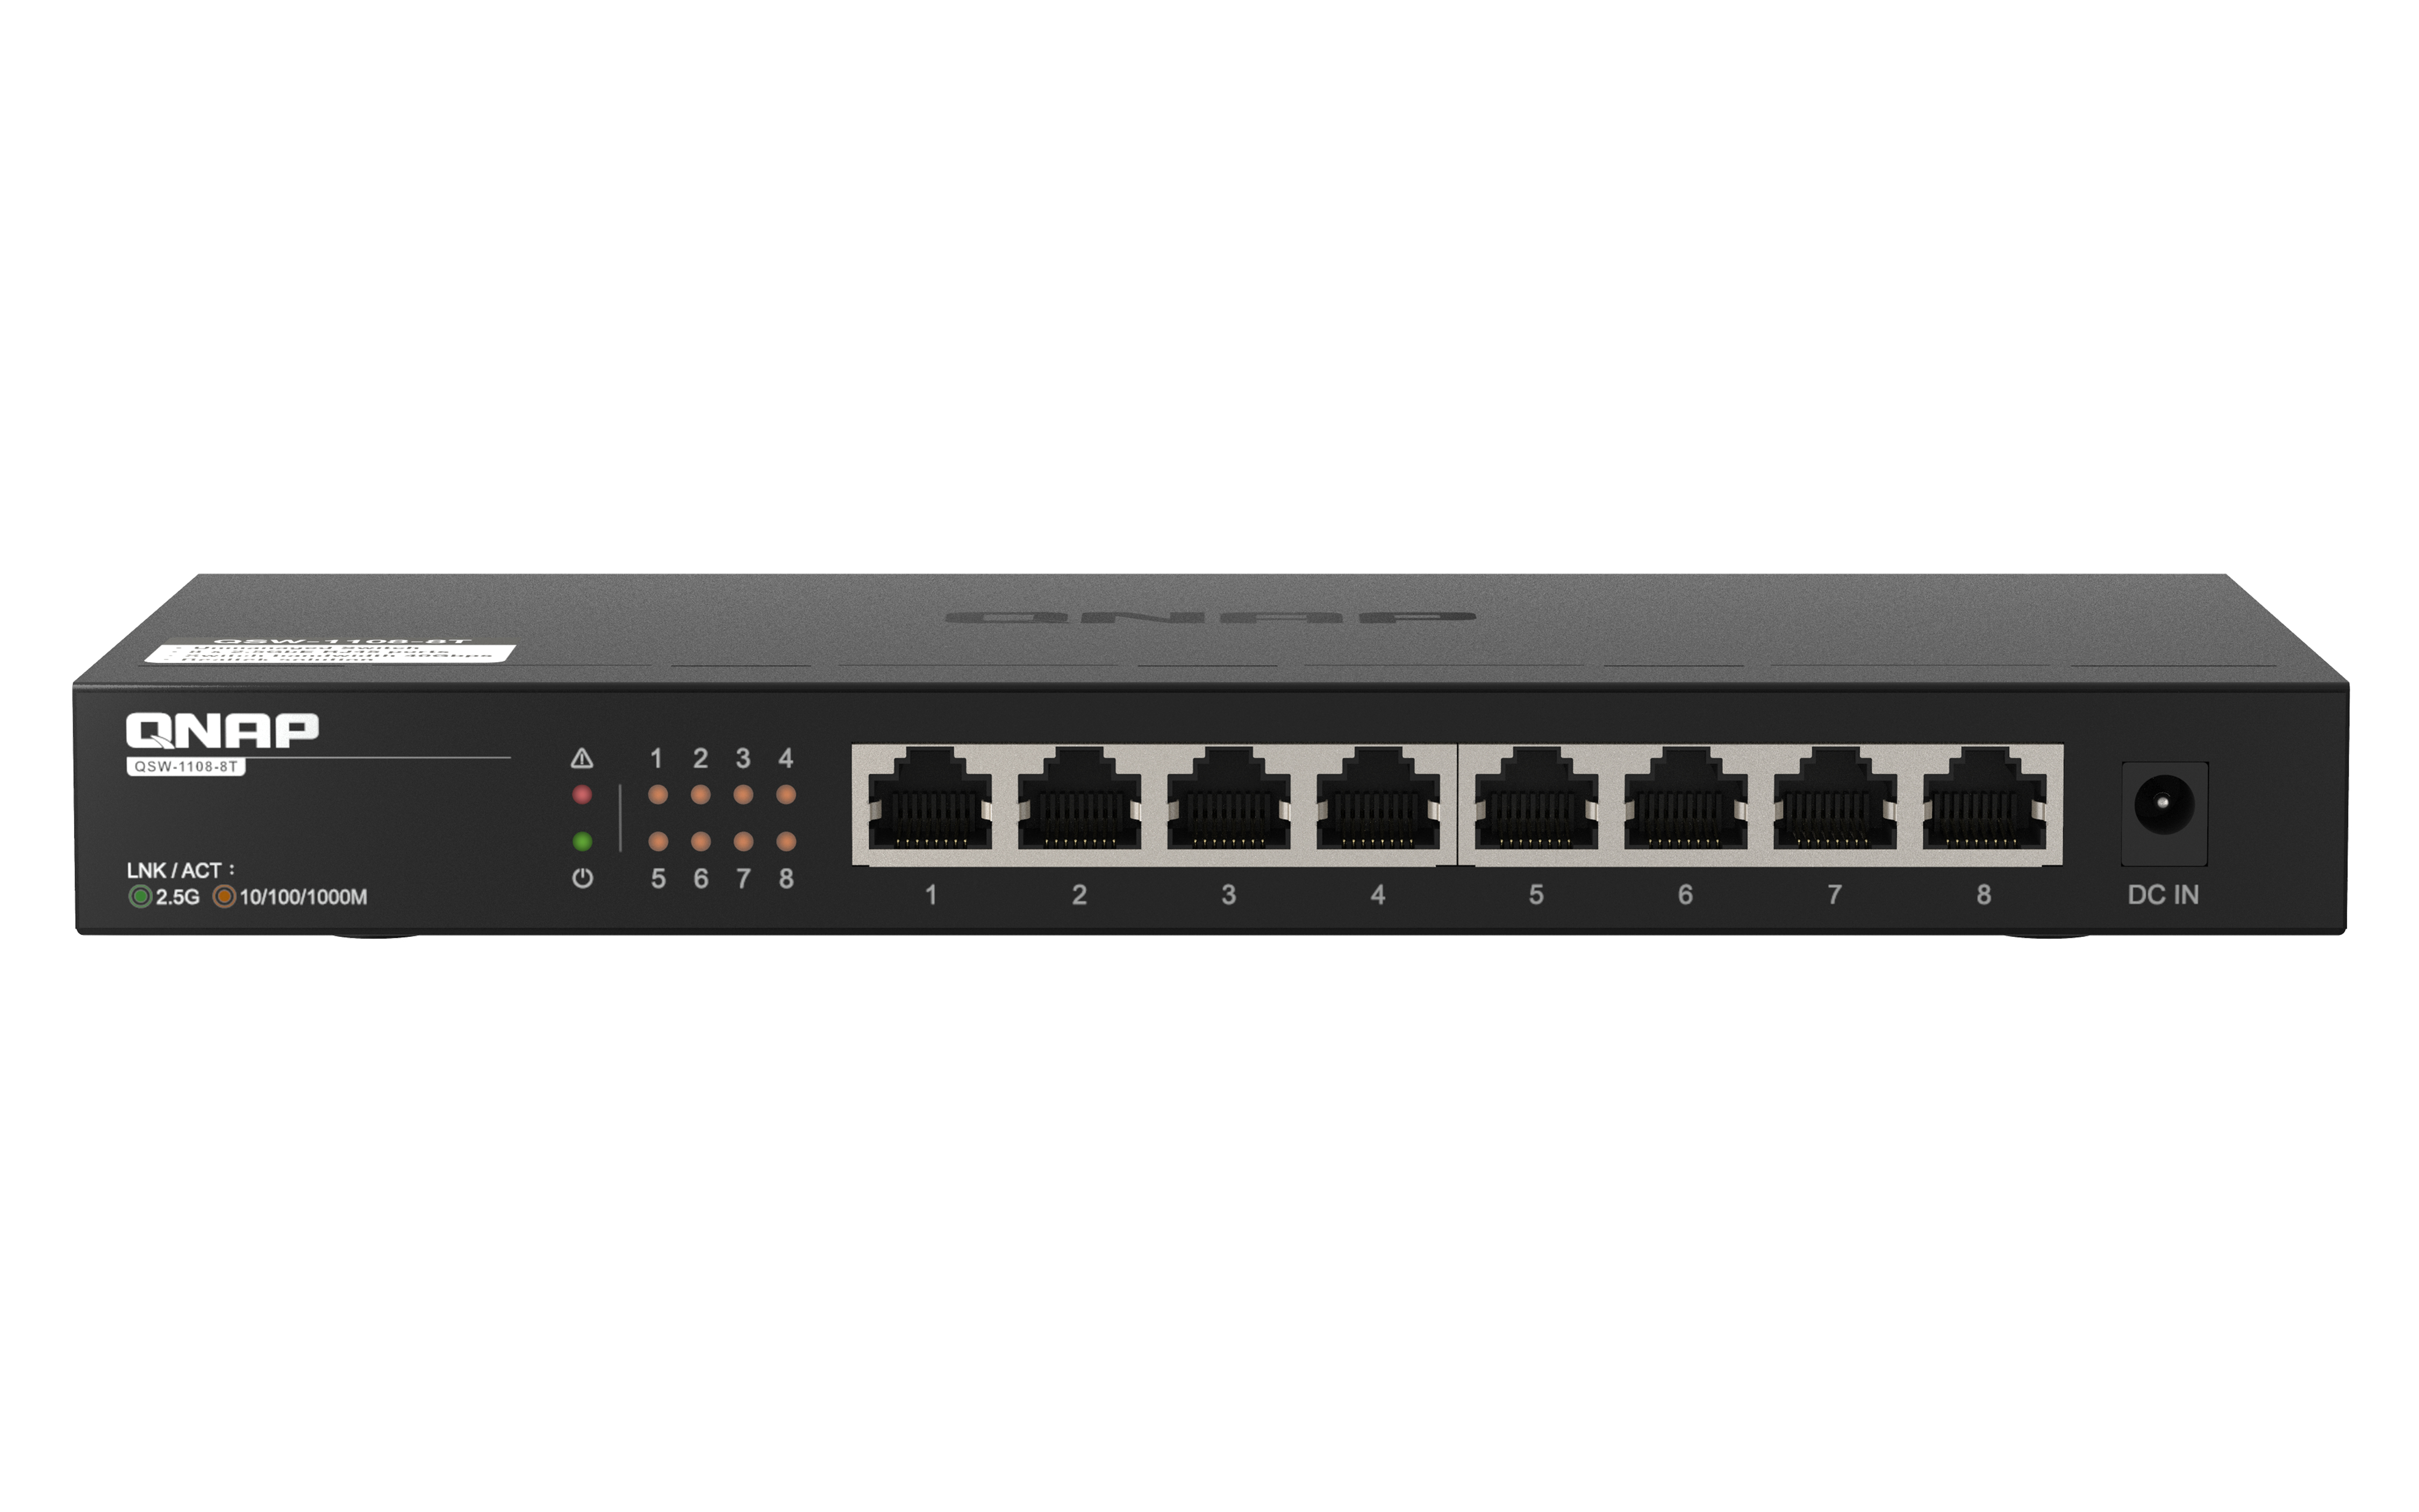  QSW-1108-8T 8 port 2.5Gbps auto negotiation 2.5G/1G/100M unmanaged switch